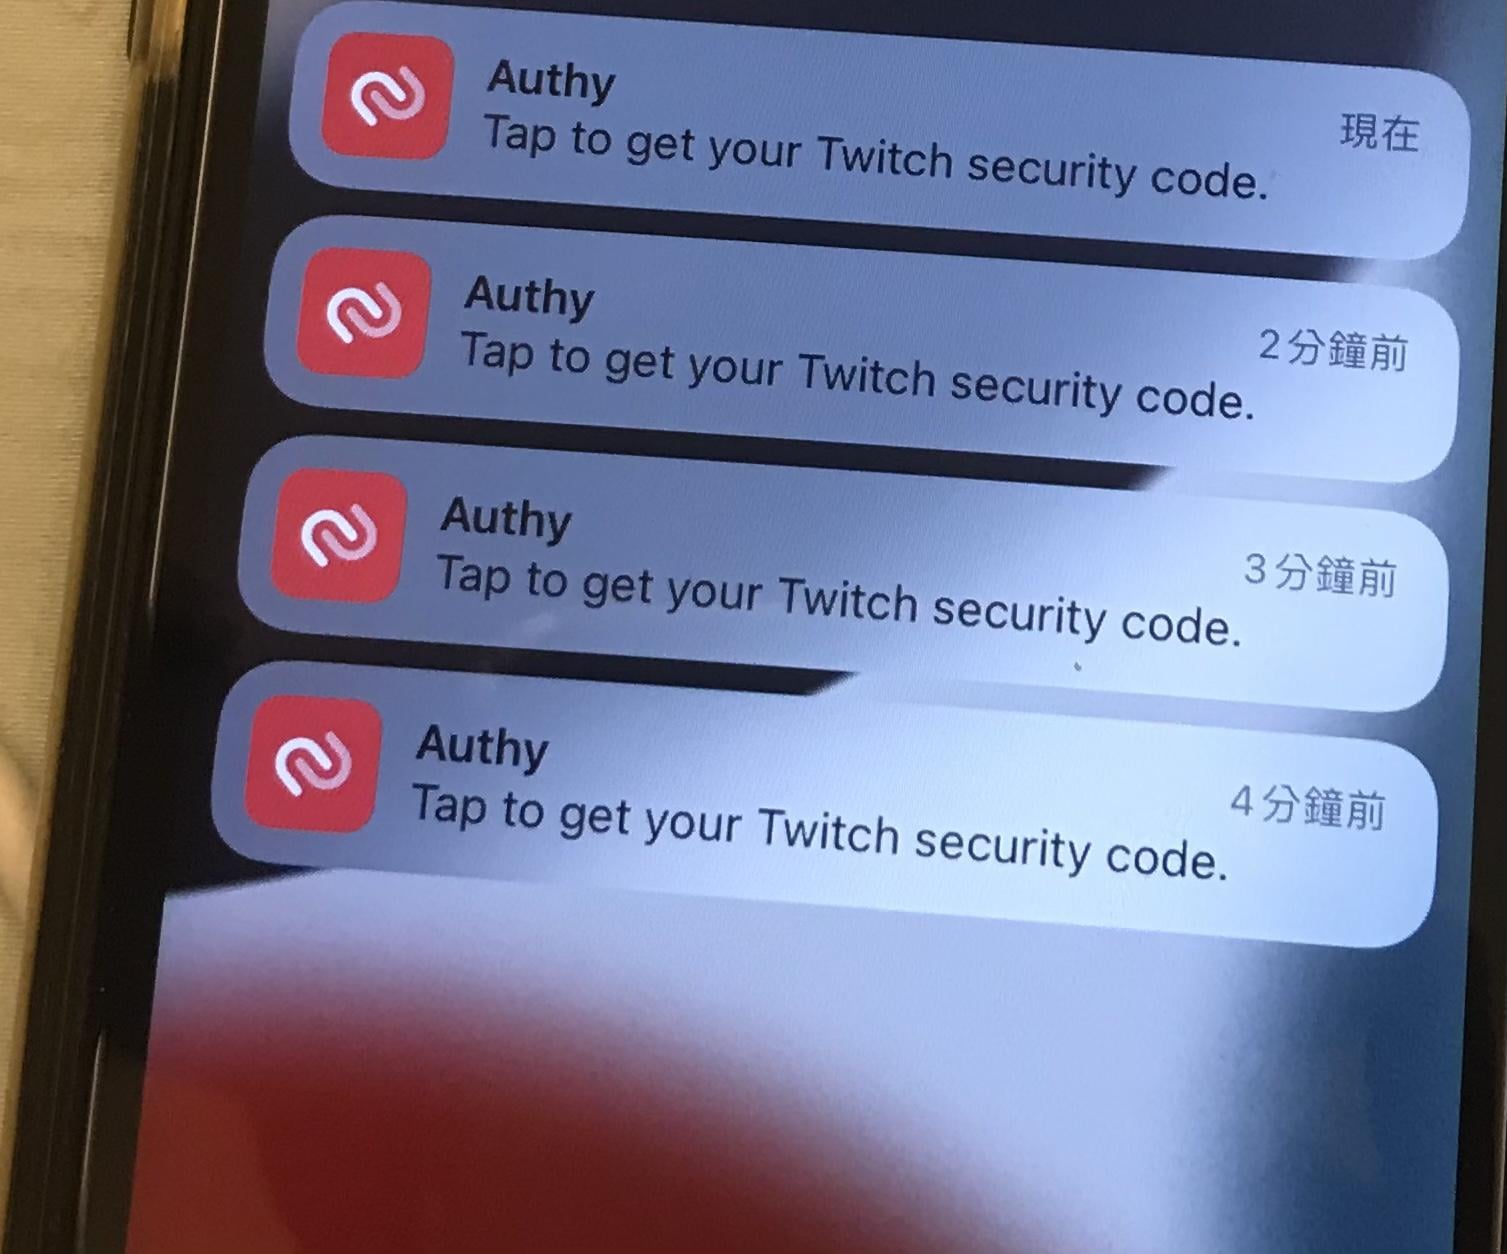 hackers-stole-2fa-codes-from-authy-users-twilio-confirms